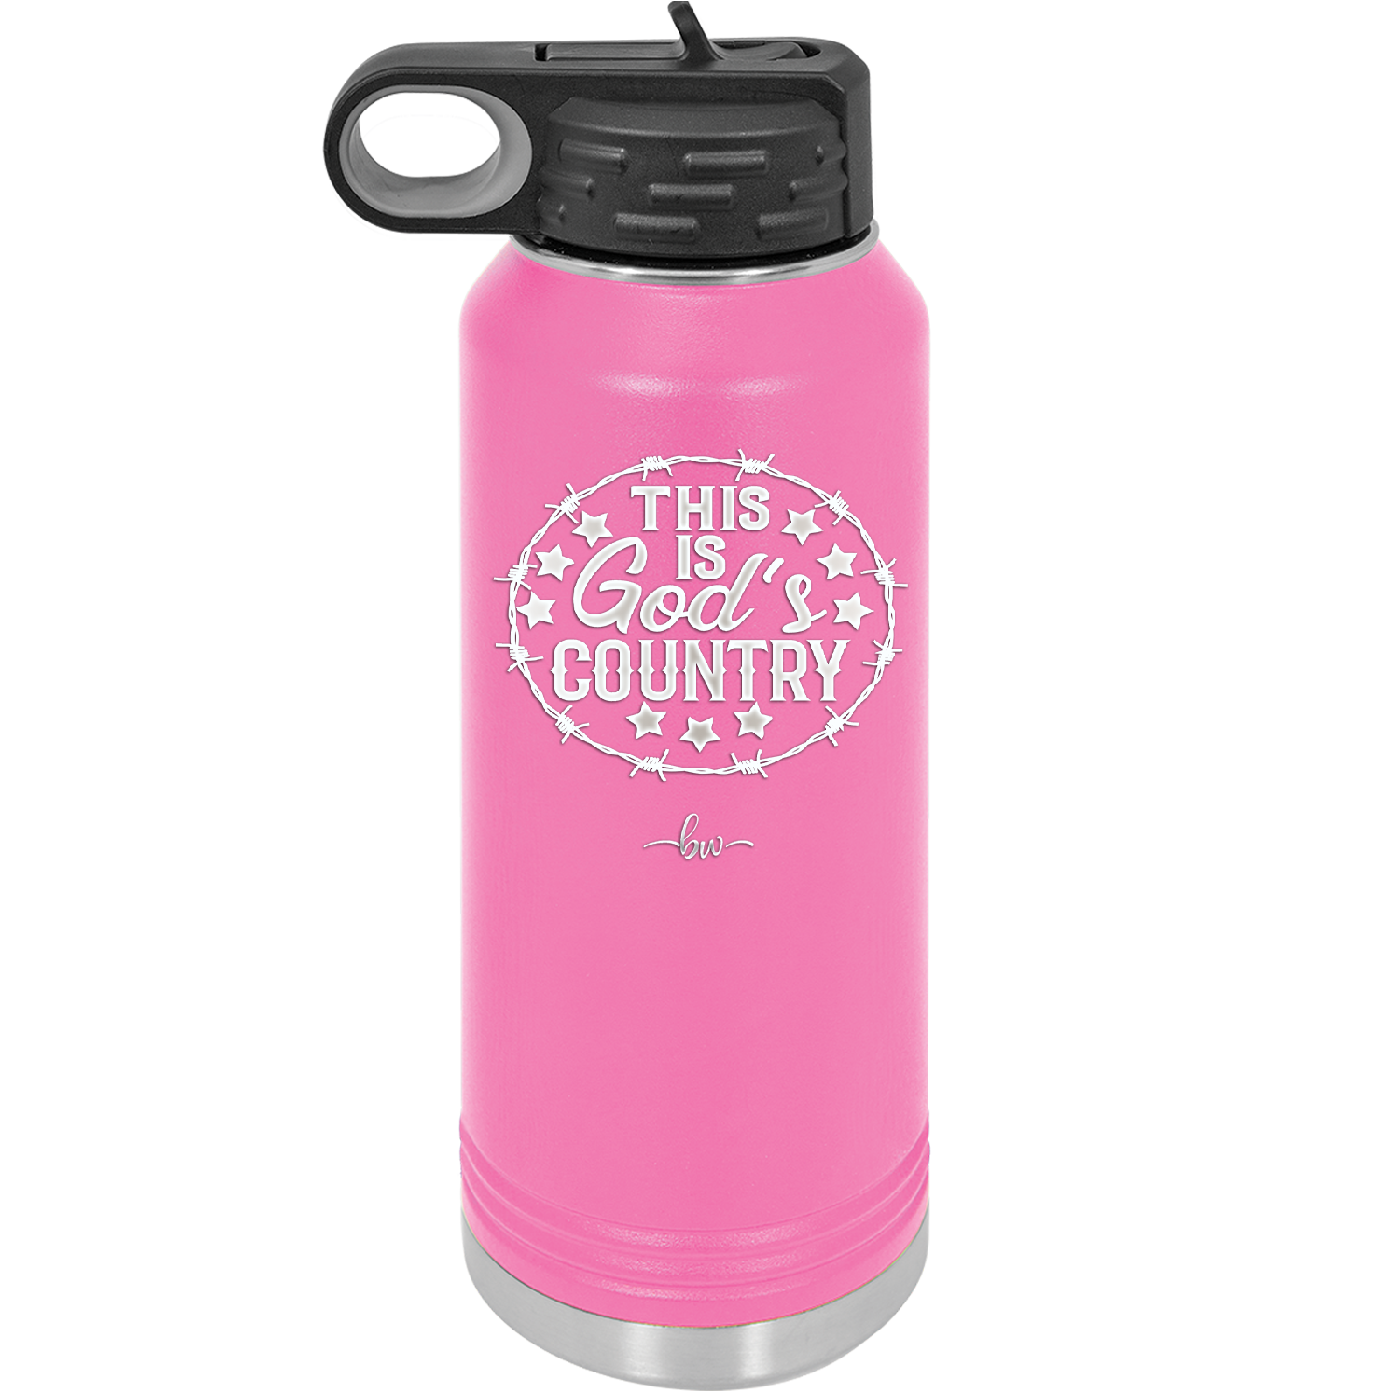 This is God's Country - Laser Engraved Stainless Steel Drinkware - 2256 -